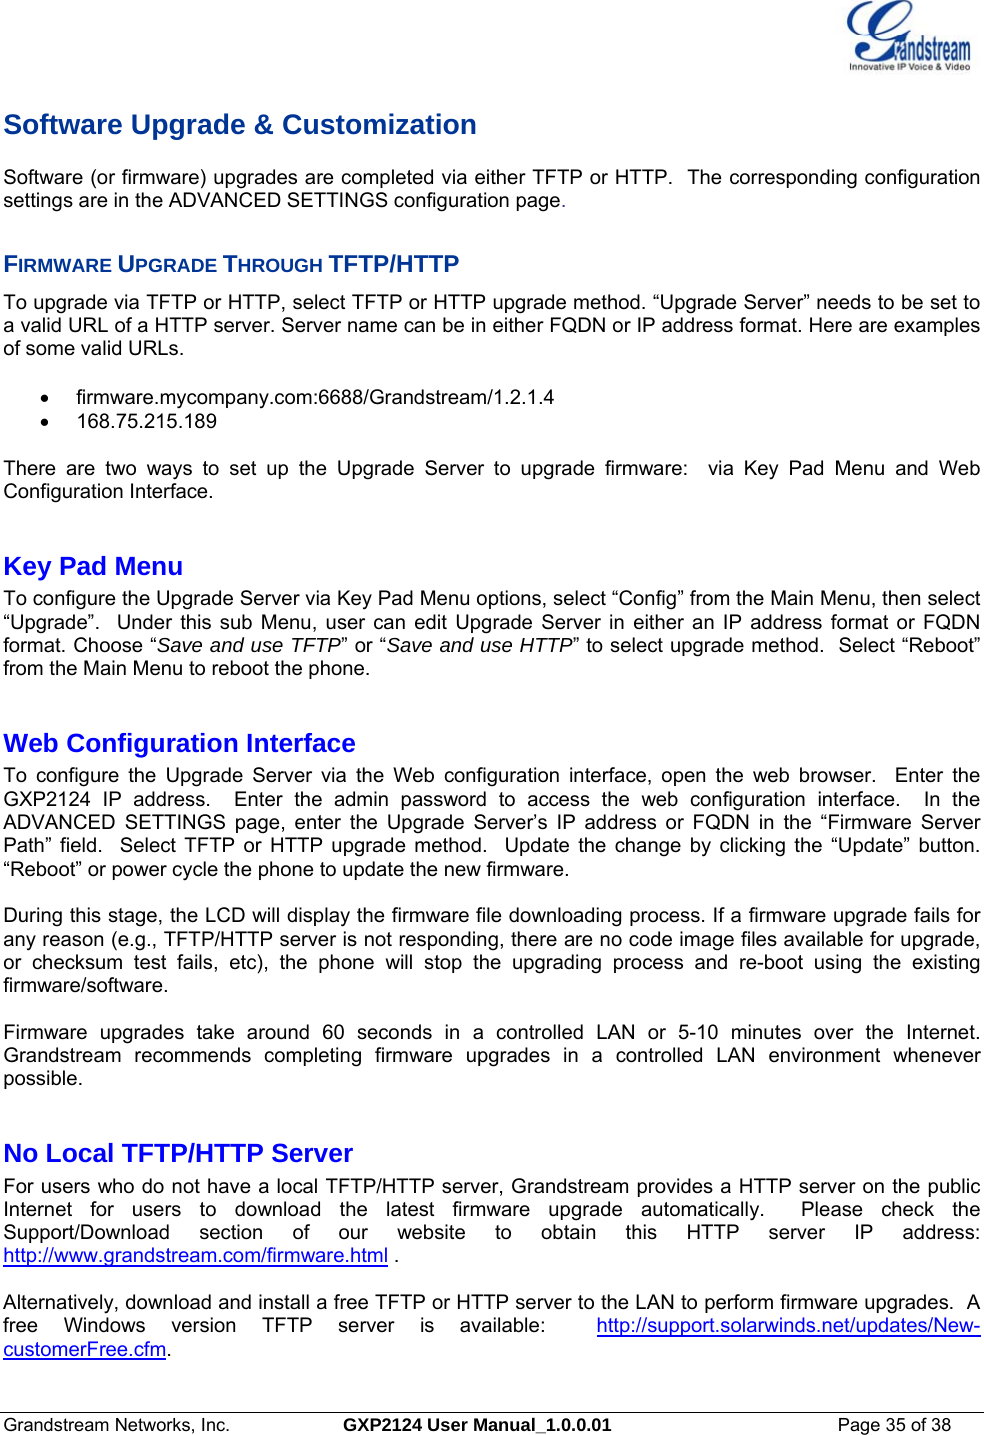  Grandstream Networks, Inc.  GXP2124 User Manual_1.0.0.01  Page 35 of 38                                                                                                                      Software Upgrade &amp; Customization Software (or firmware) upgrades are completed via either TFTP or HTTP.  The corresponding configuration settings are in the ADVANCED SETTINGS configuration page.   FIRMWARE UPGRADE THROUGH TFTP/HTTP To upgrade via TFTP or HTTP, select TFTP or HTTP upgrade method. “Upgrade Server” needs to be set to a valid URL of a HTTP server. Server name can be in either FQDN or IP address format. Here are examples of some valid URLs.   • firmware.mycompany.com:6688/Grandstream/1.2.1.4 • 168.75.215.189    There are two ways to set up the Upgrade Server to upgrade firmware:  via Key Pad Menu and Web Configuration Interface.  Key Pad Menu       To configure the Upgrade Server via Key Pad Menu options, select “Config” from the Main Menu, then select “Upgrade”.  Under this sub Menu, user can edit Upgrade Server in either an IP address format or FQDN format. Choose “Save and use TFTP” or “Save and use HTTP” to select upgrade method.  Select “Reboot” from the Main Menu to reboot the phone.  Web Configuration Interface To configure the Upgrade Server via the Web configuration interface, open the web browser.  Enter the GXP2124 IP address.  Enter the admin password to access the web configuration interface.  In the ADVANCED SETTINGS page, enter the Upgrade Server’s IP address or FQDN in the “Firmware Server Path” field.  Select TFTP or HTTP upgrade method.  Update the change by clicking the “Update” button.  “Reboot” or power cycle the phone to update the new firmware.    During this stage, the LCD will display the firmware file downloading process. If a firmware upgrade fails for any reason (e.g., TFTP/HTTP server is not responding, there are no code image files available for upgrade, or checksum test fails, etc), the phone will stop the upgrading process and re-boot using the existing firmware/software.  Firmware upgrades take around 60 seconds in a controlled LAN or 5-10 minutes over the Internet.  Grandstream recommends completing firmware upgrades in a controlled LAN environment whenever possible.   No Local TFTP/HTTP Server For users who do not have a local TFTP/HTTP server, Grandstream provides a HTTP server on the public Internet for users to download the latest firmware upgrade automatically.  Please check the Support/Download section of our website to obtain this HTTP server IP address:  http://www.grandstream.com/firmware.html .    Alternatively, download and install a free TFTP or HTTP server to the LAN to perform firmware upgrades.  A free Windows version TFTP server is available:  http://support.solarwinds.net/updates/New-customerFree.cfm.      